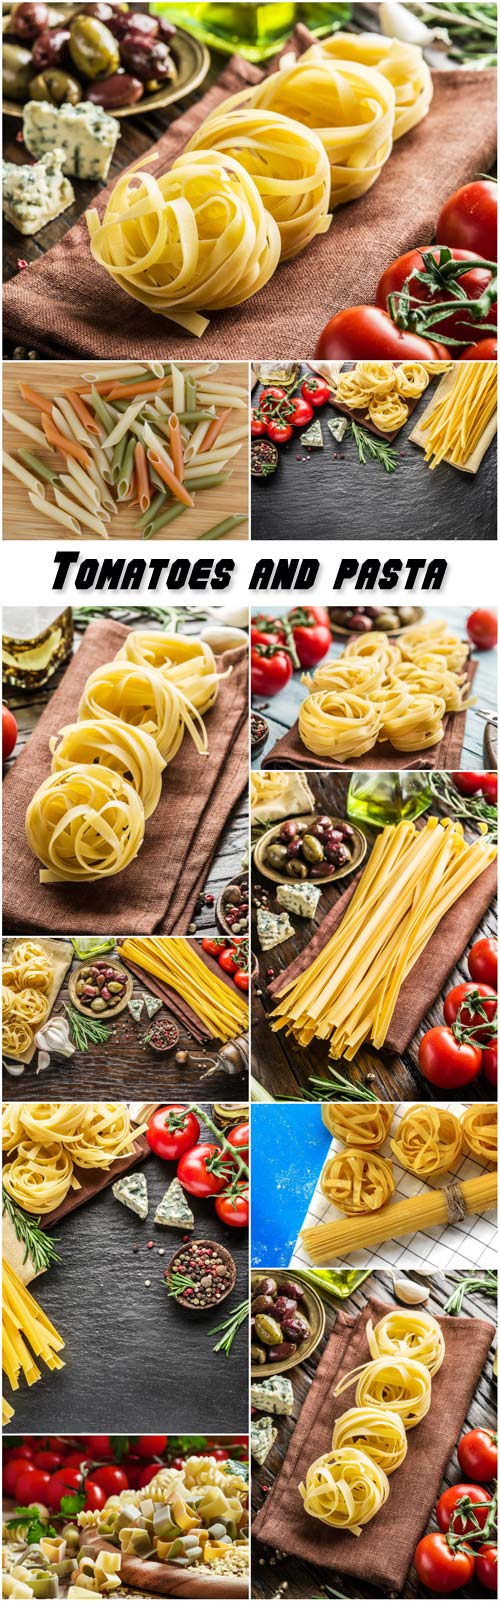 Tomatoes, spaghetti pasta and spices